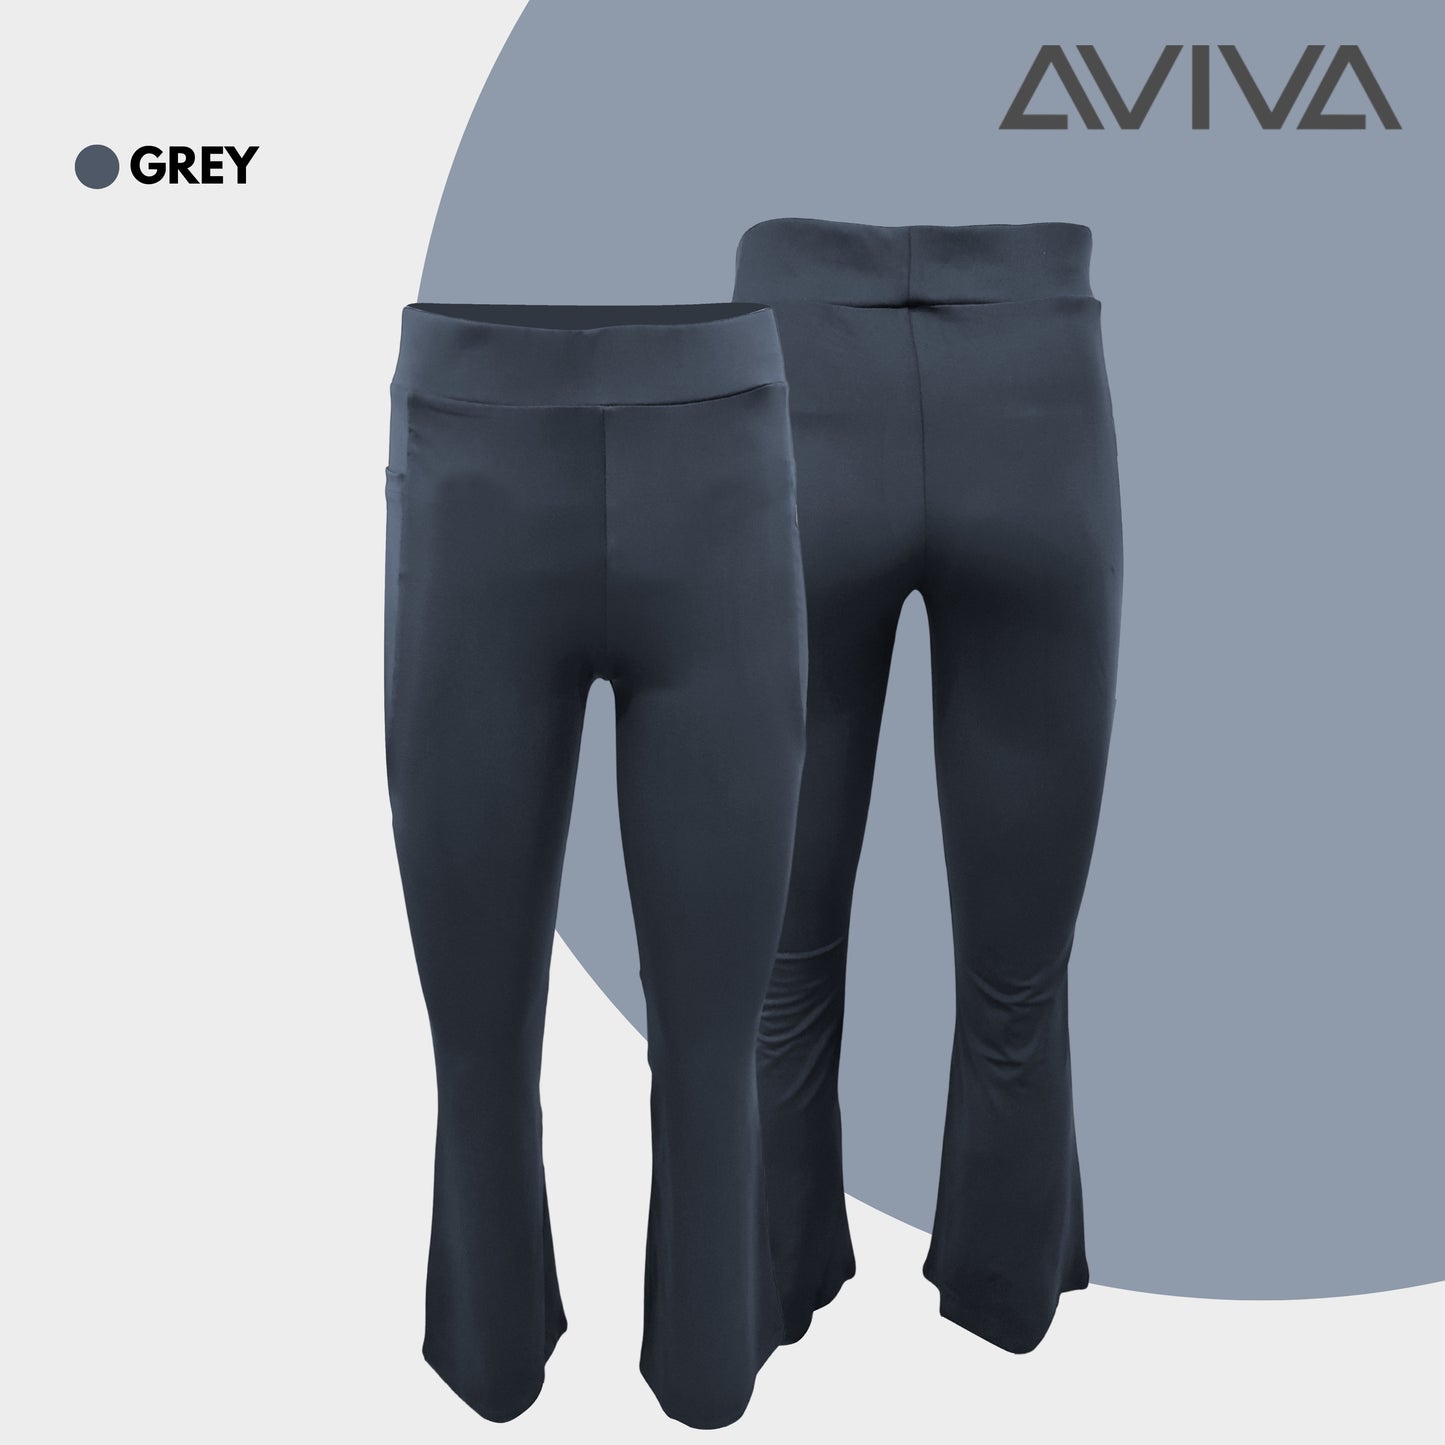 AVIVA Arleth Comfortable and Soft Trousers (80-4199)